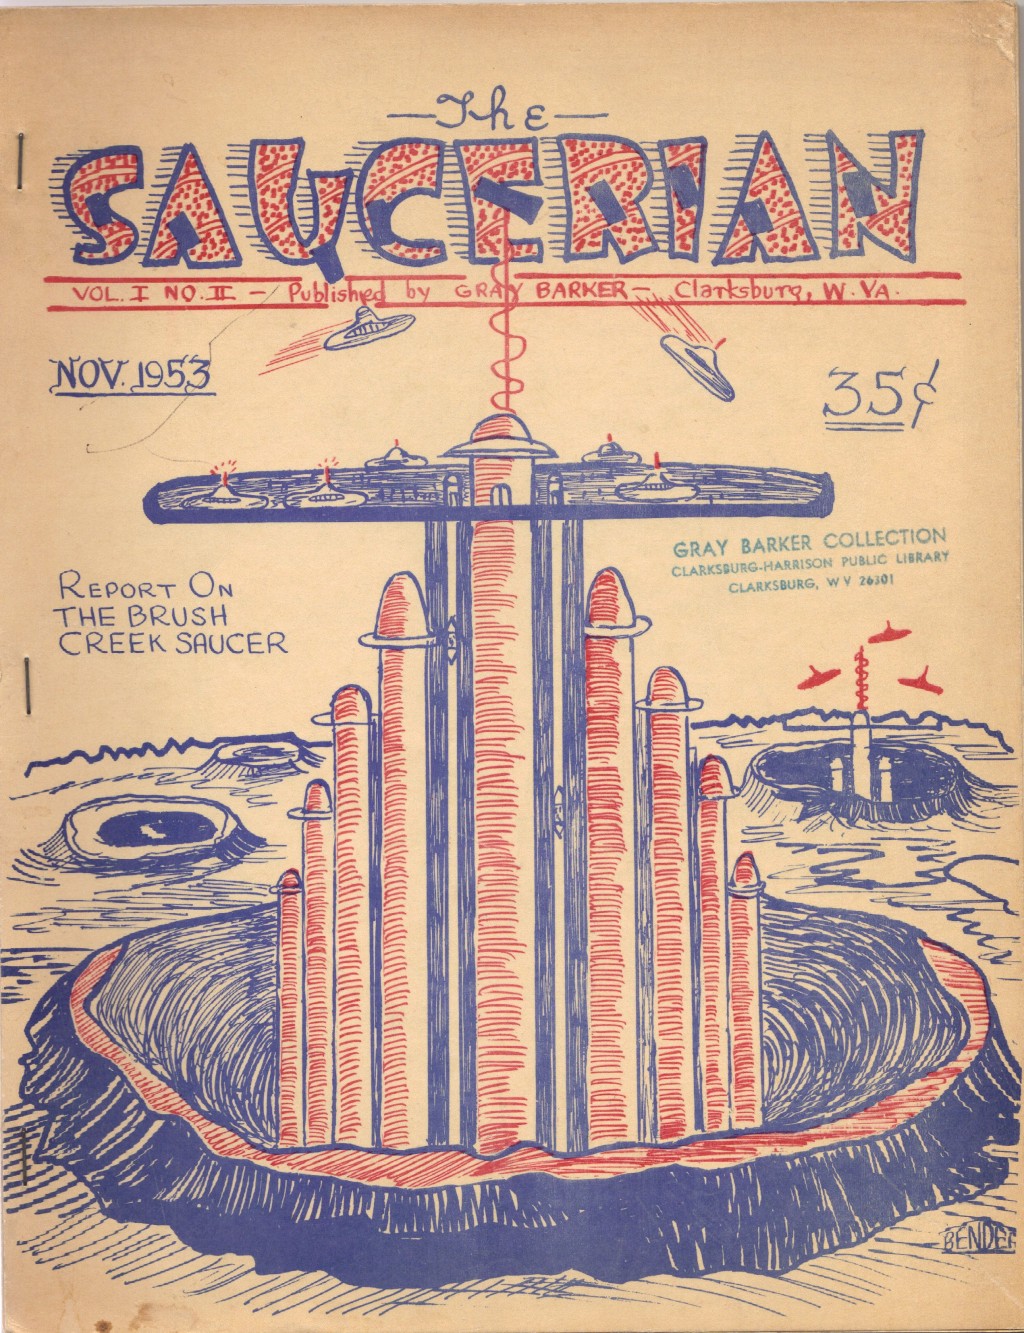 Cover illustration by Albert Bender, for Gray Barker's "The Saucerian," November 1953. (From the Gray Barker Collection, Clarksburg-Harrison Public Library.) The Tower of Babel, as conceived by its builders ... ?